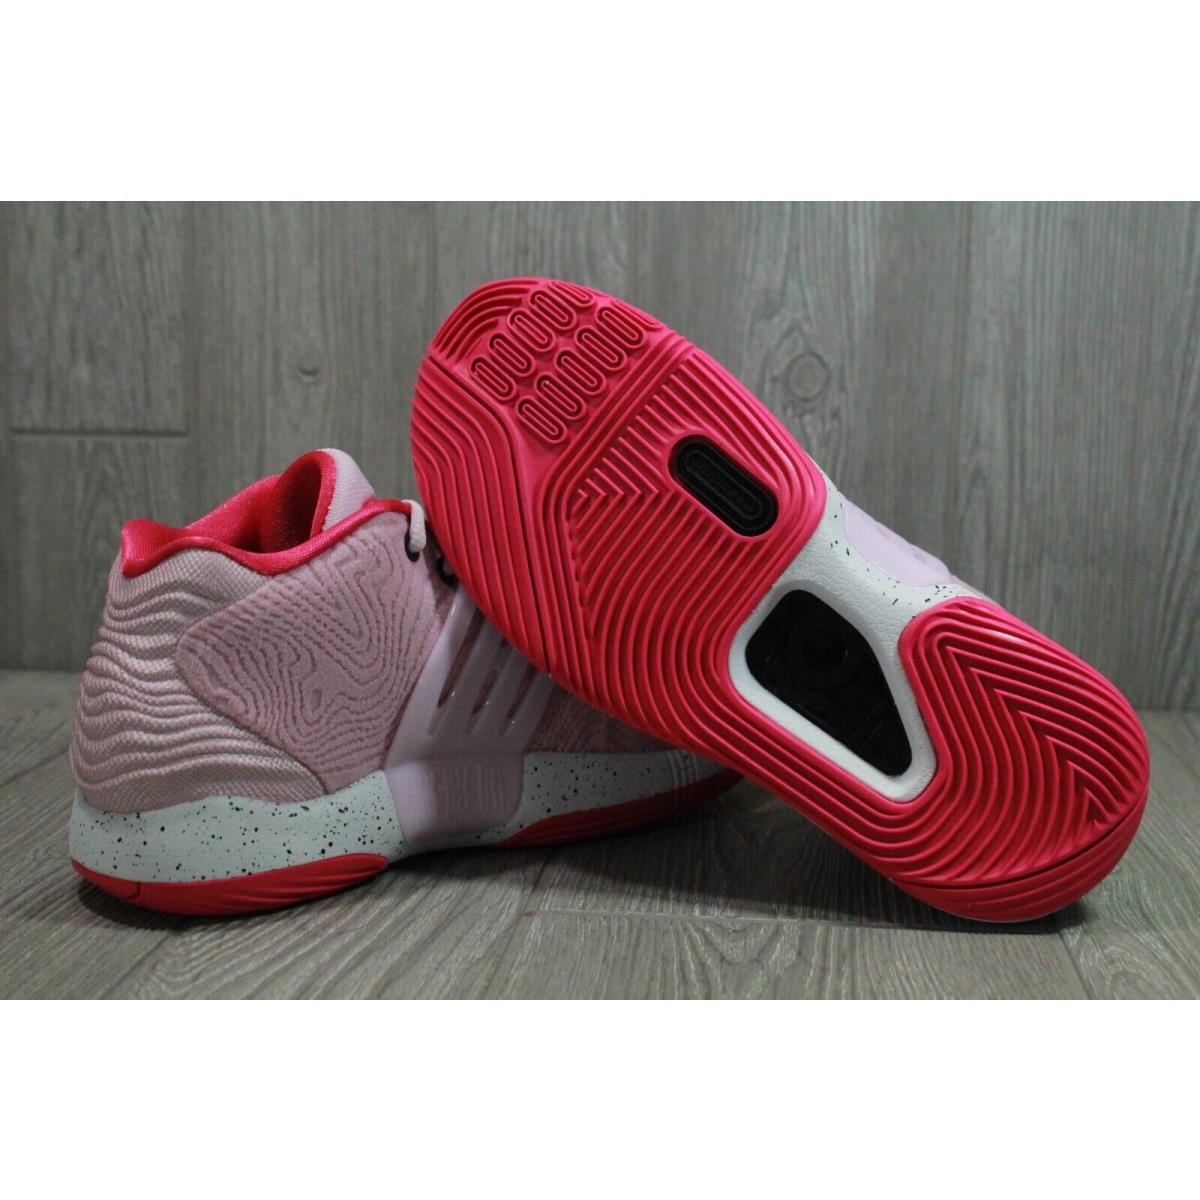 Nike shoes  - Pink 4